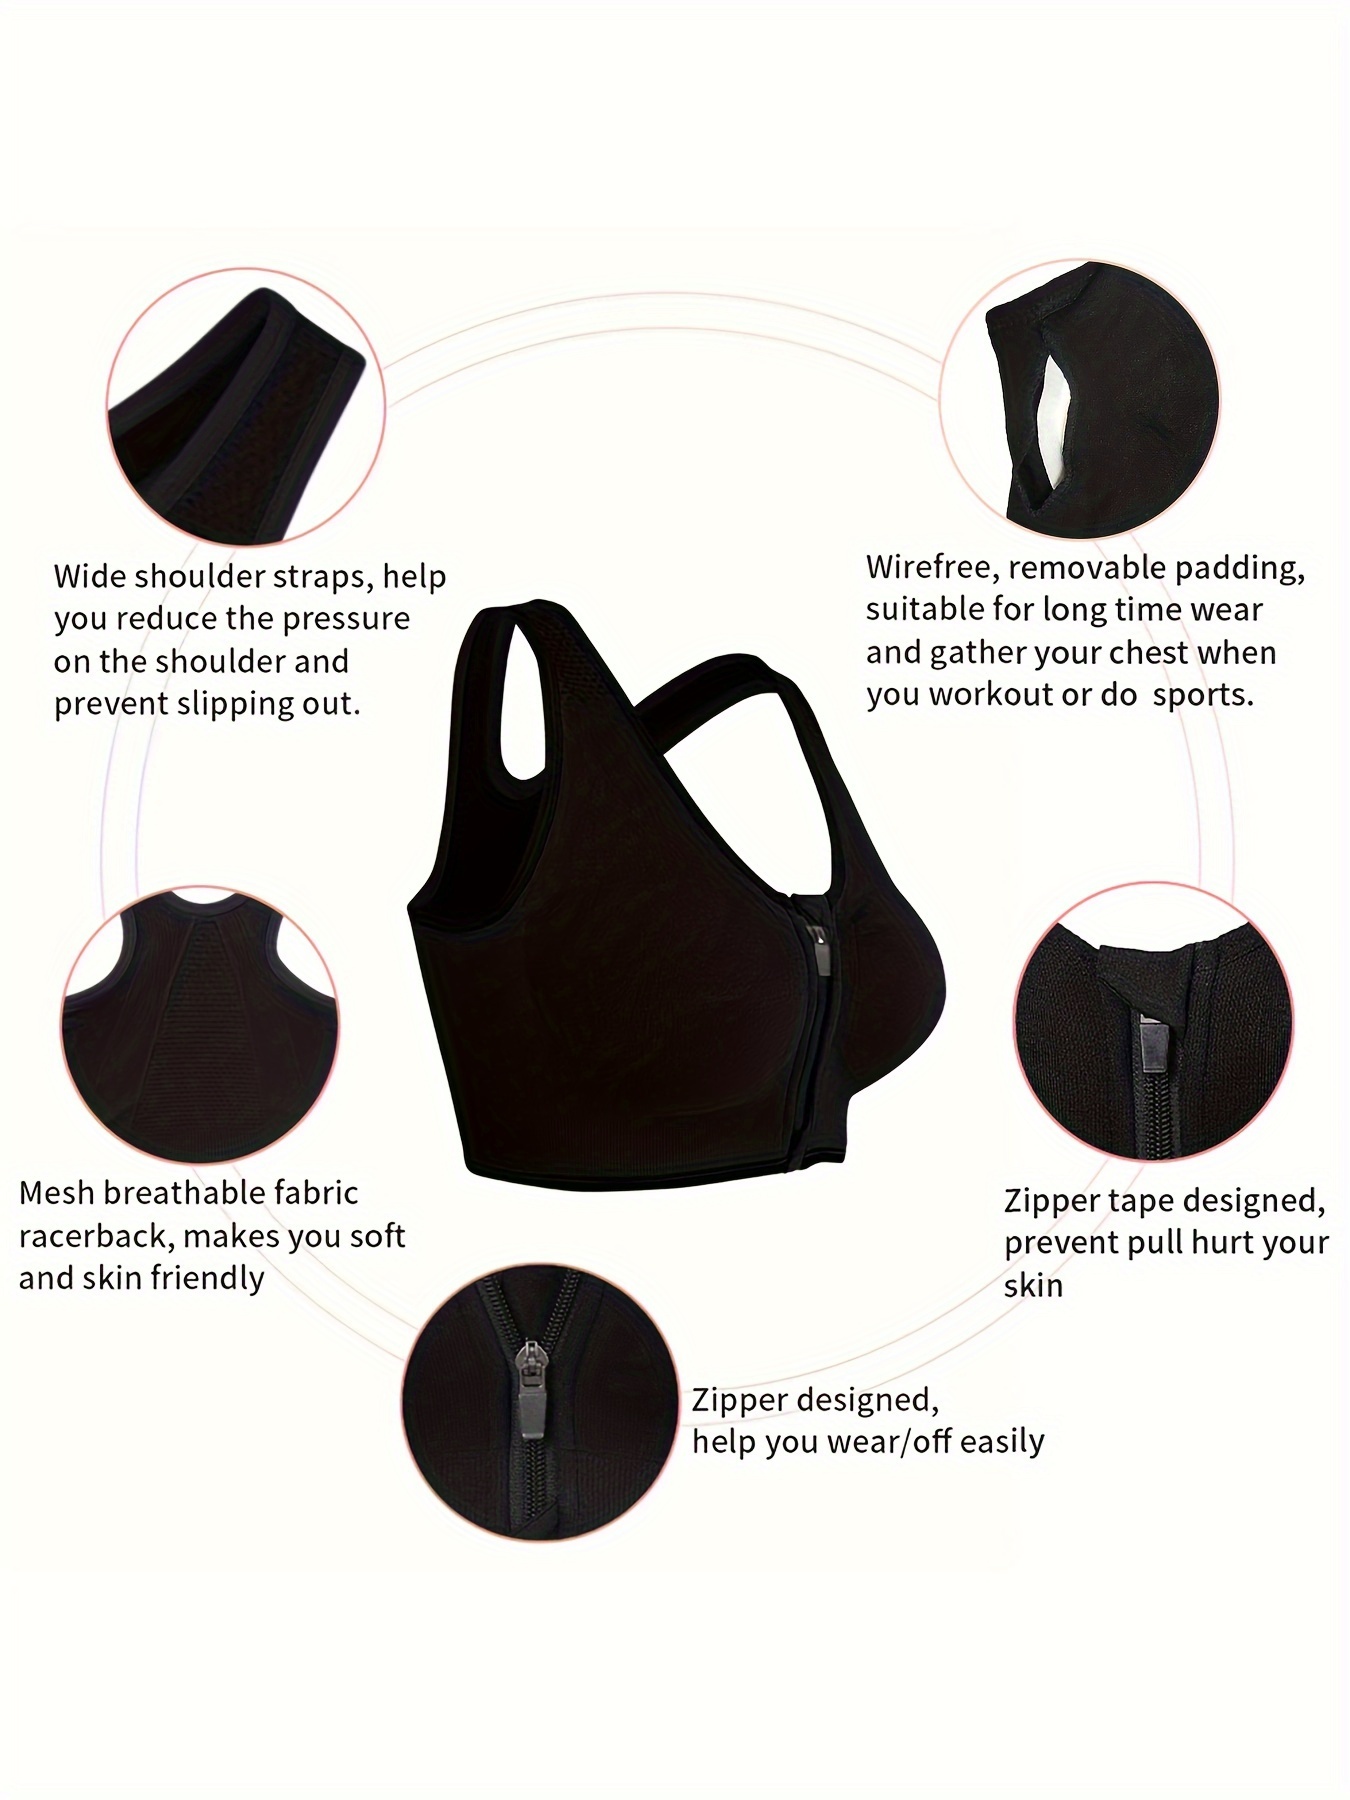 Women's Zip Front Sports Bra with Removable Padded Cups Wireless Post- Surgery Racerback Tops Active Yoga Bras Zipper